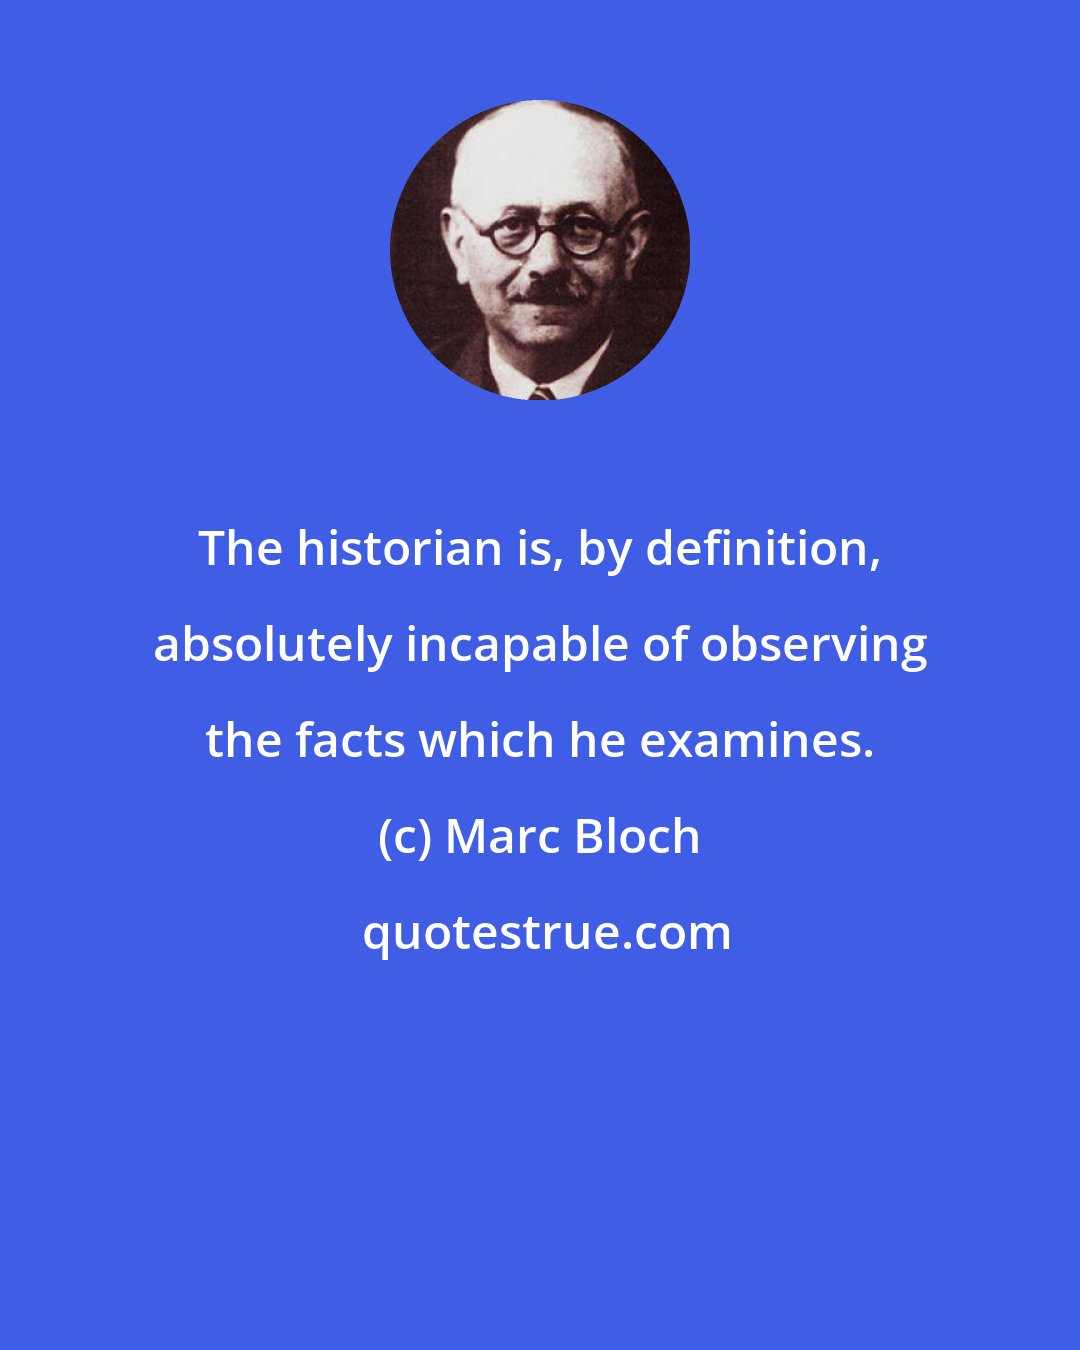 Marc Bloch: The historian is, by definition, absolutely incapable of observing the facts which he examines.